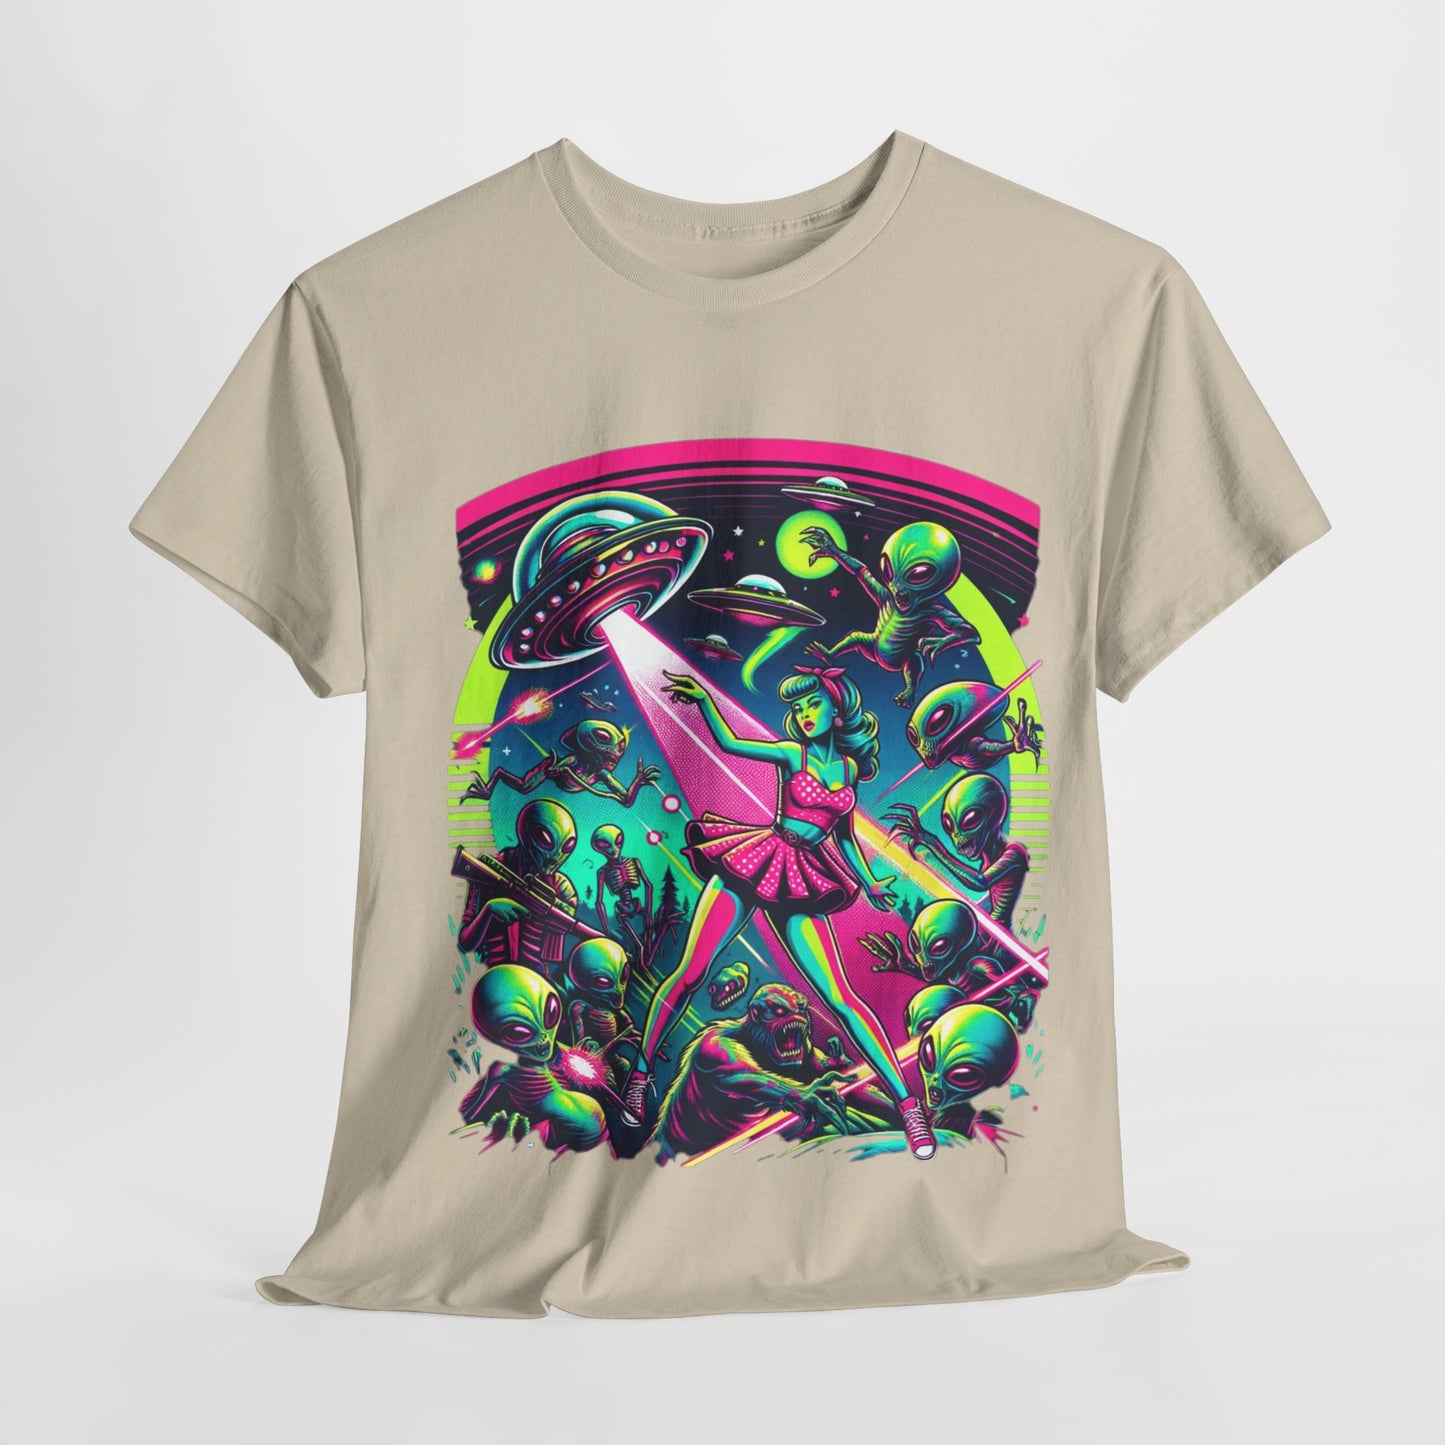 🚀👽 Limited Edition Alien Invasion Tee: Iconic Pin-Up Style Sci-Fi Fashion – Grab Yours & Stand Out!